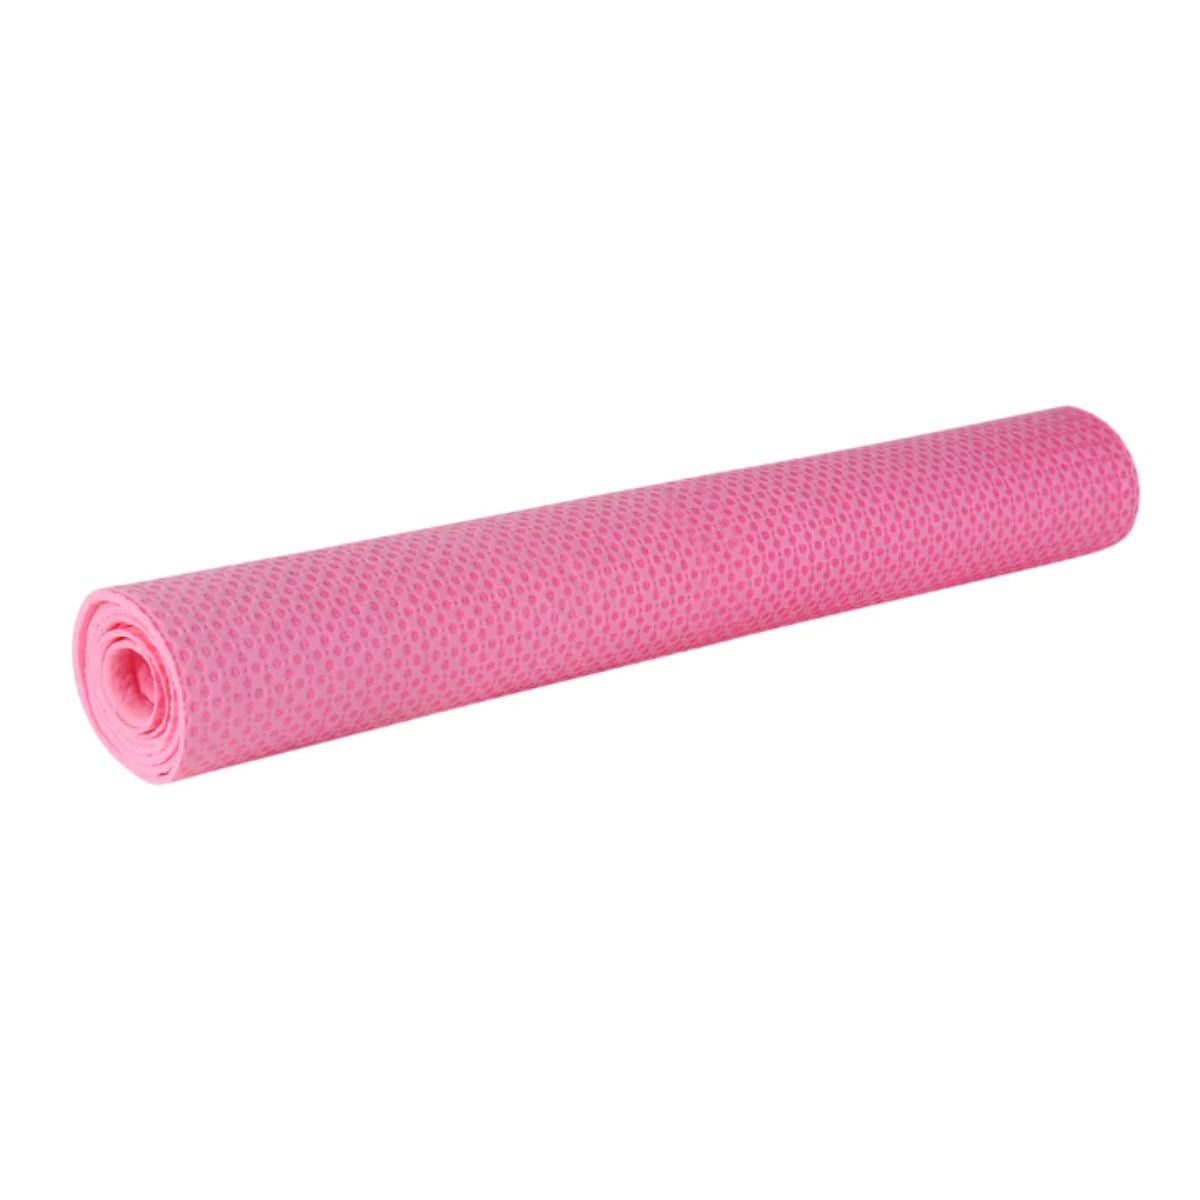 Hyper Body Cooling Towel - Pink 4